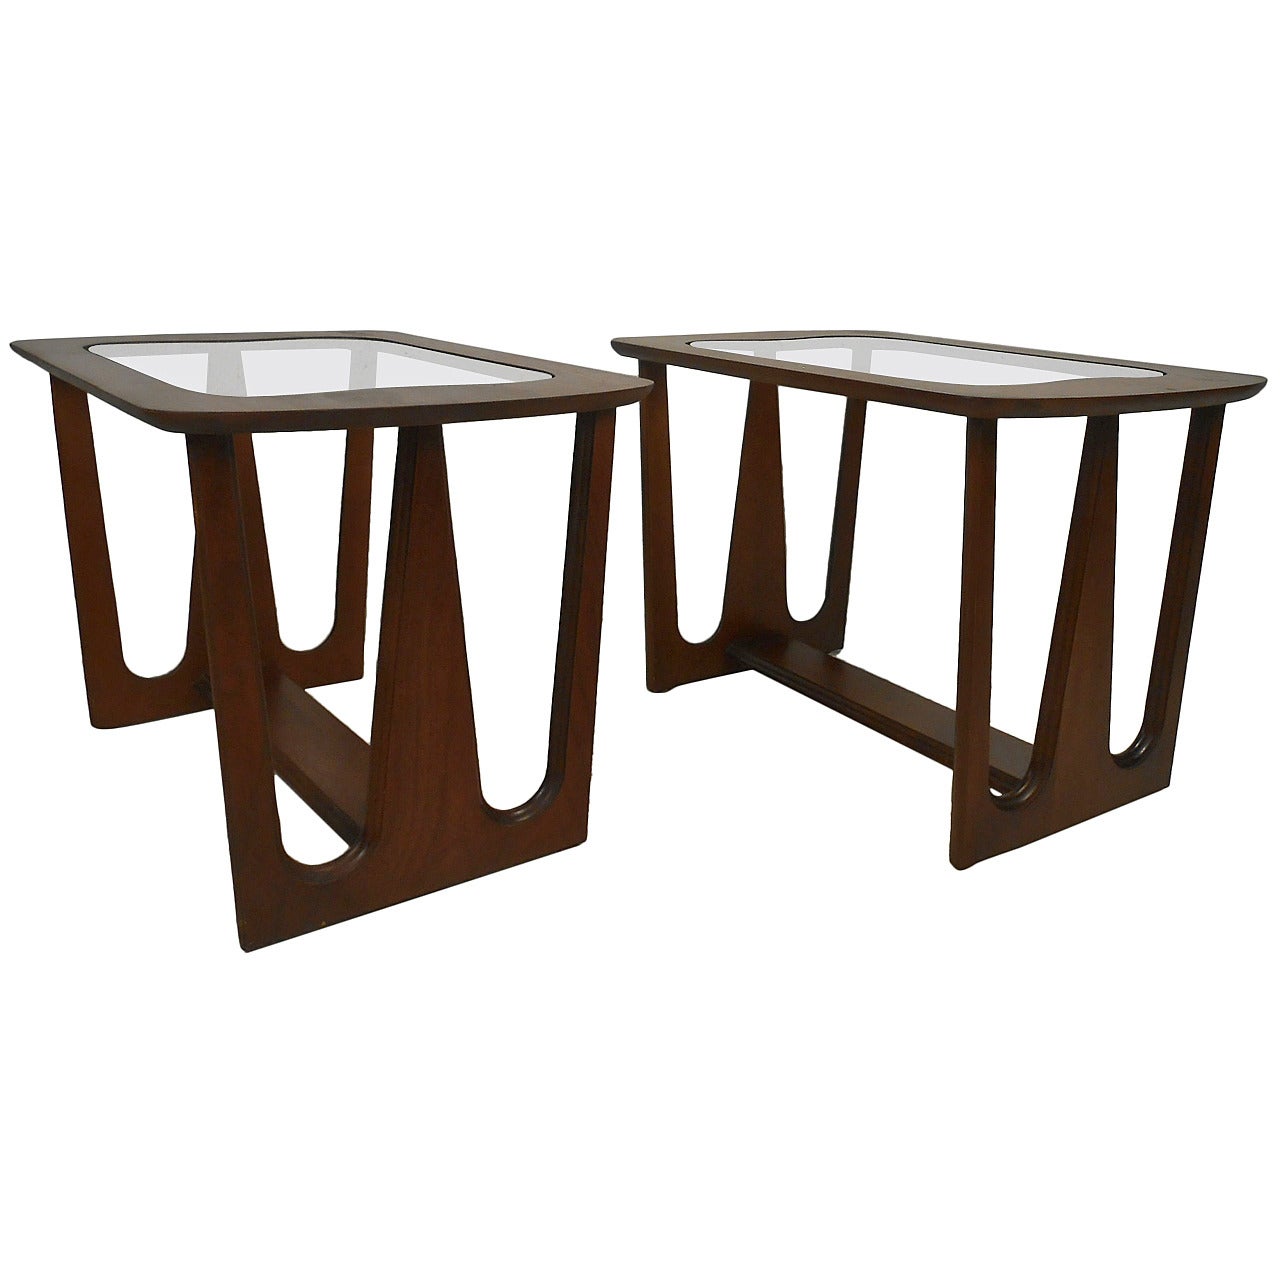 Pair of Mid-Century Modern Walnut Side/End Tables